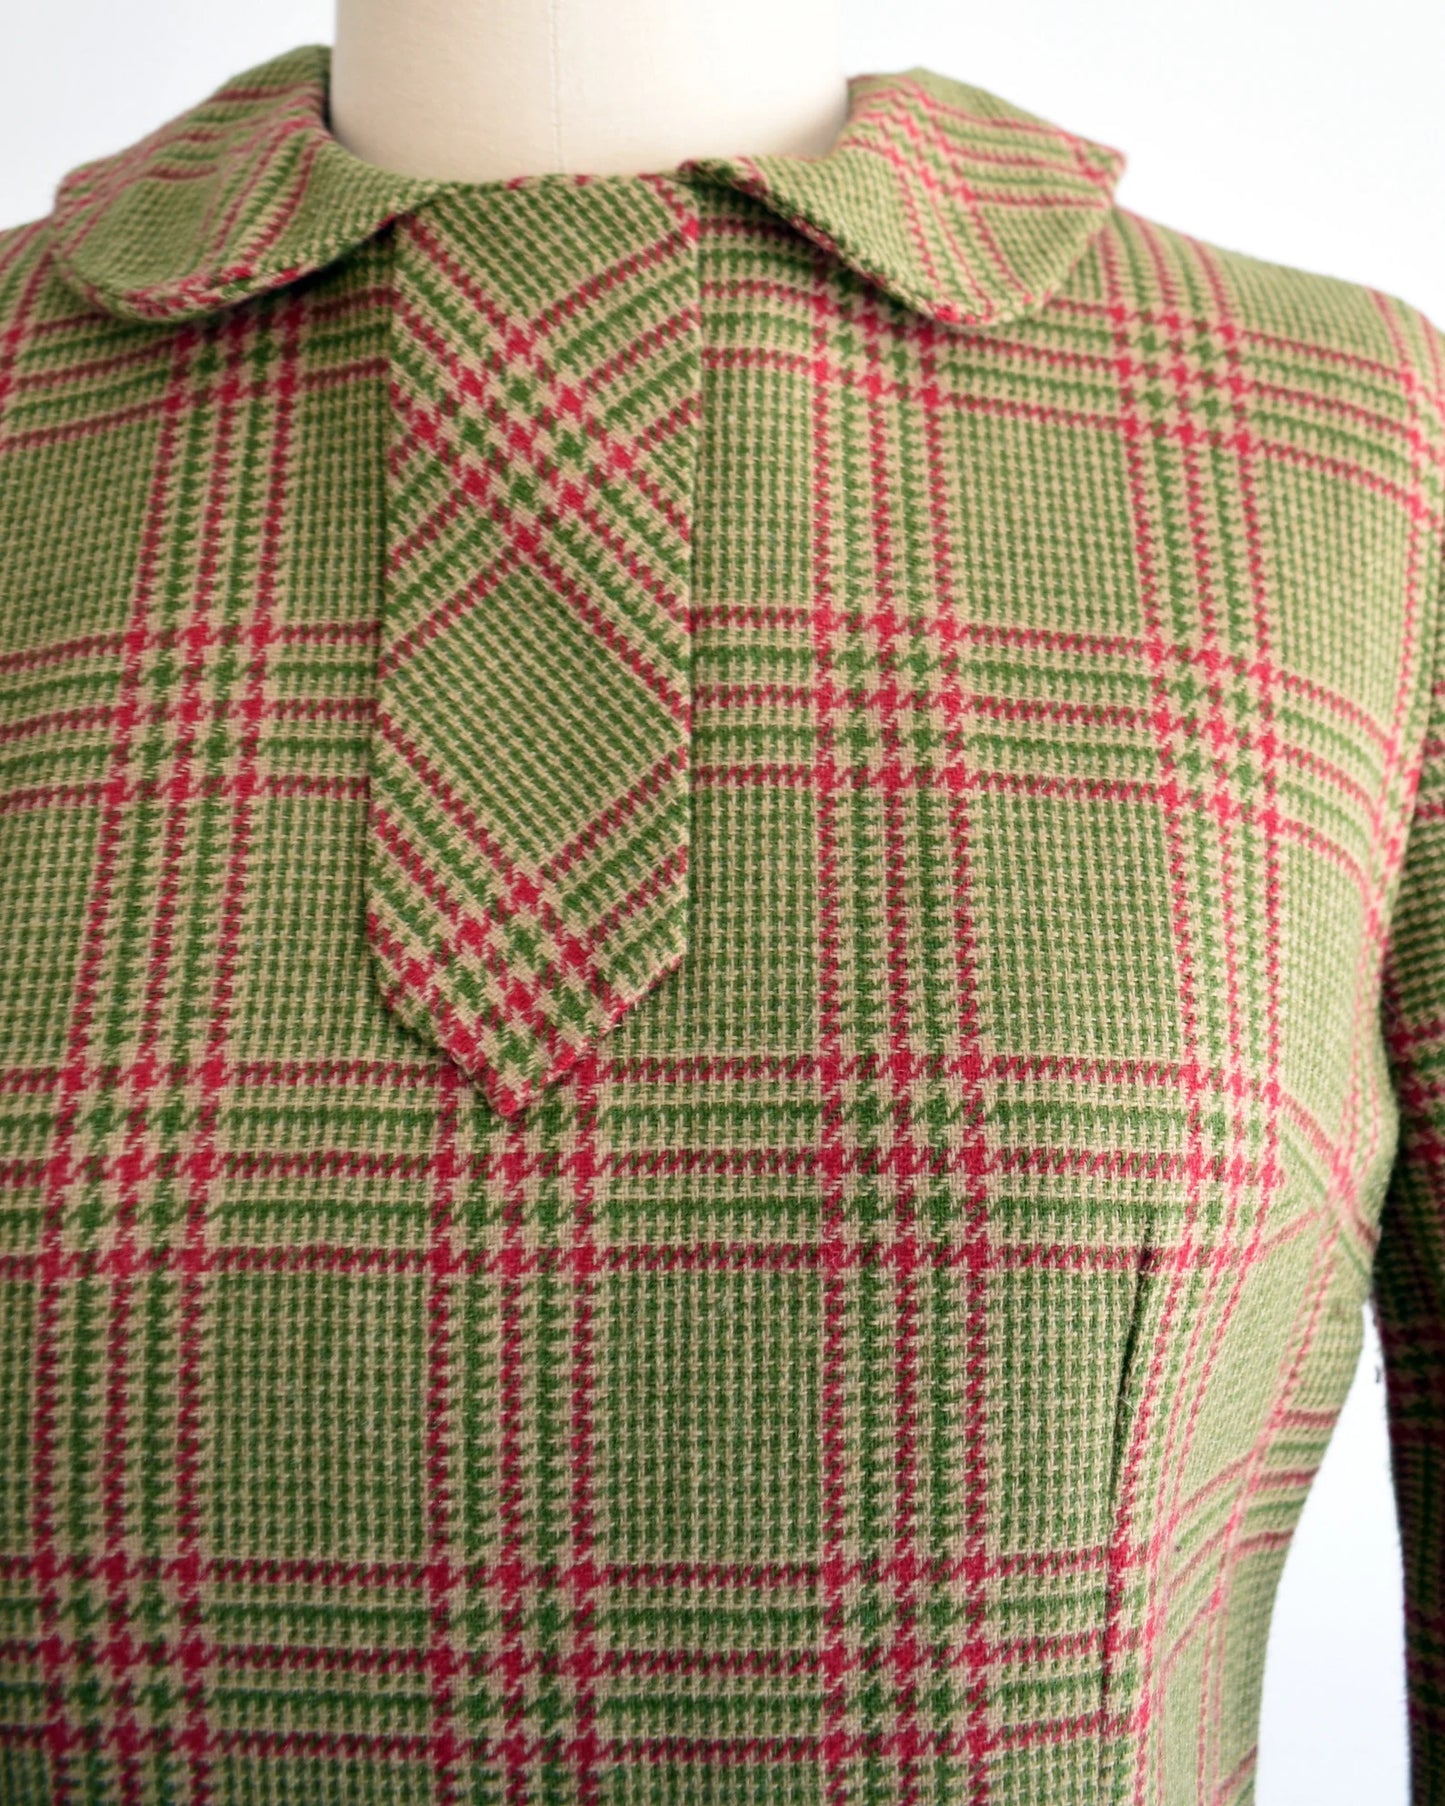 Close up of the green and pink plaid bodice